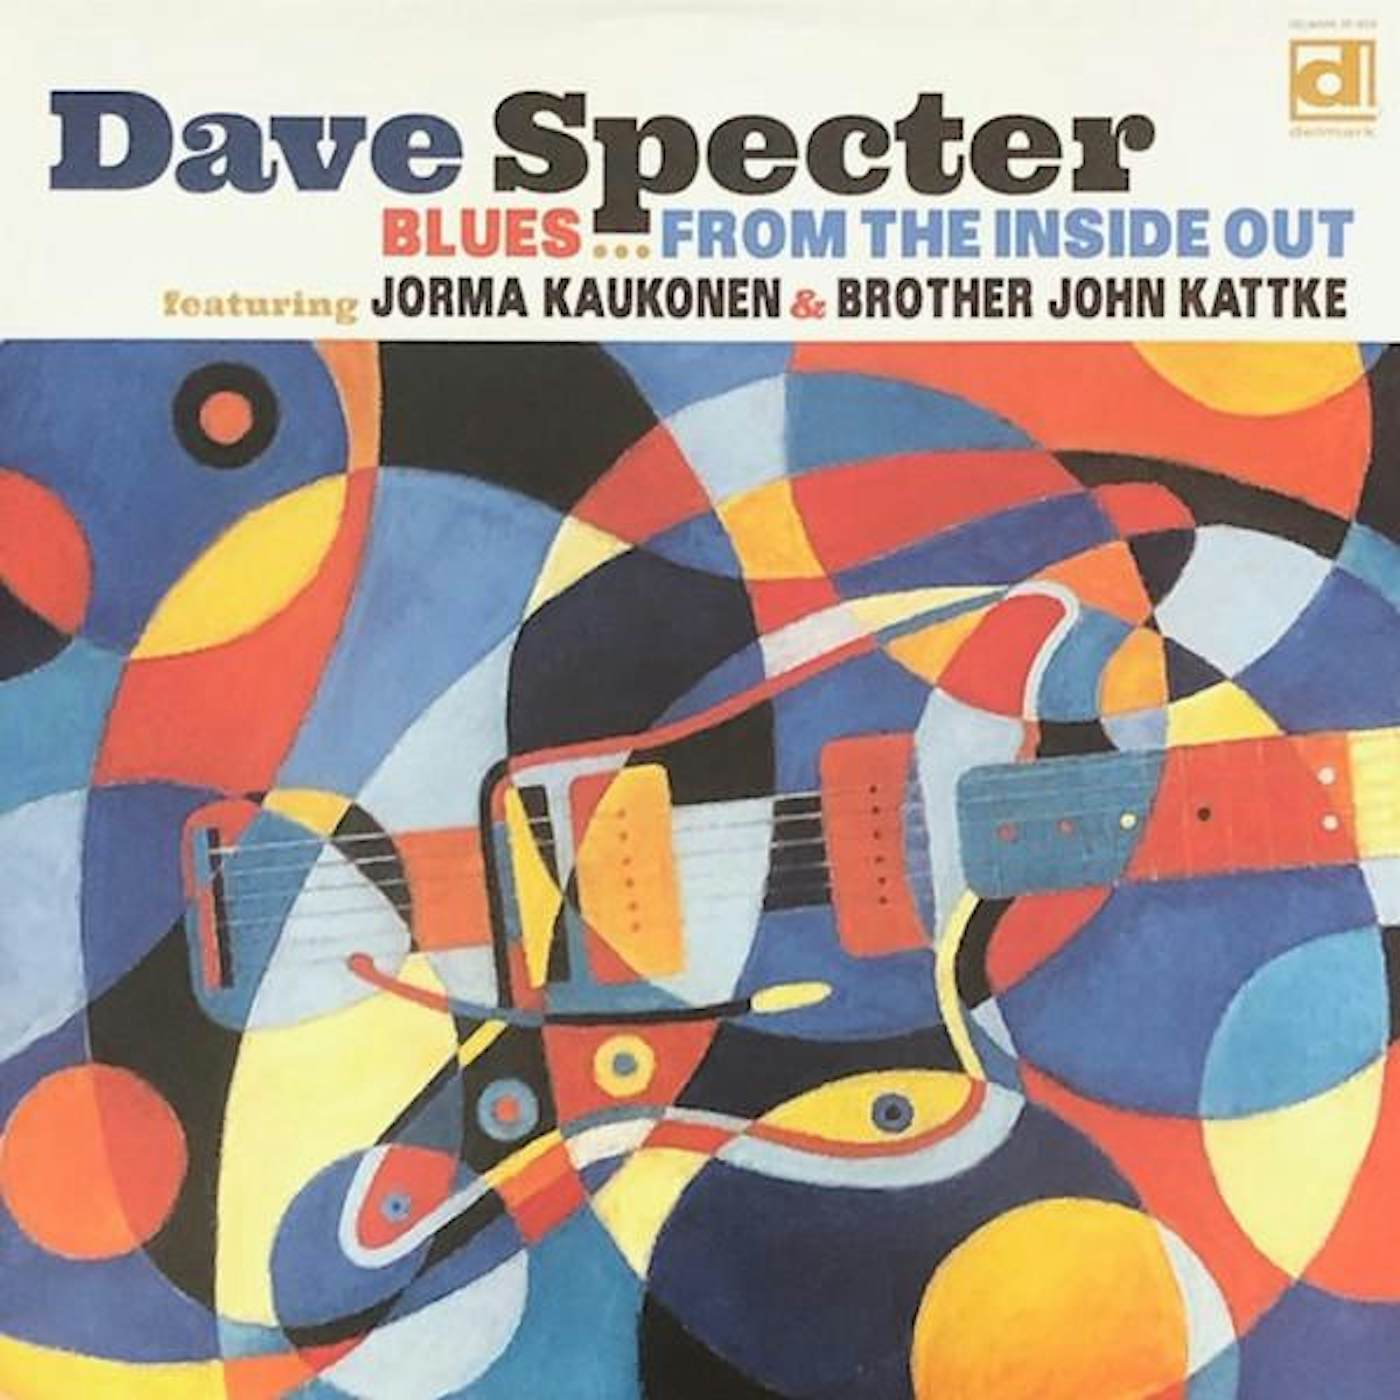 Dave Specter Blues from the Inside Out Vinyl Record